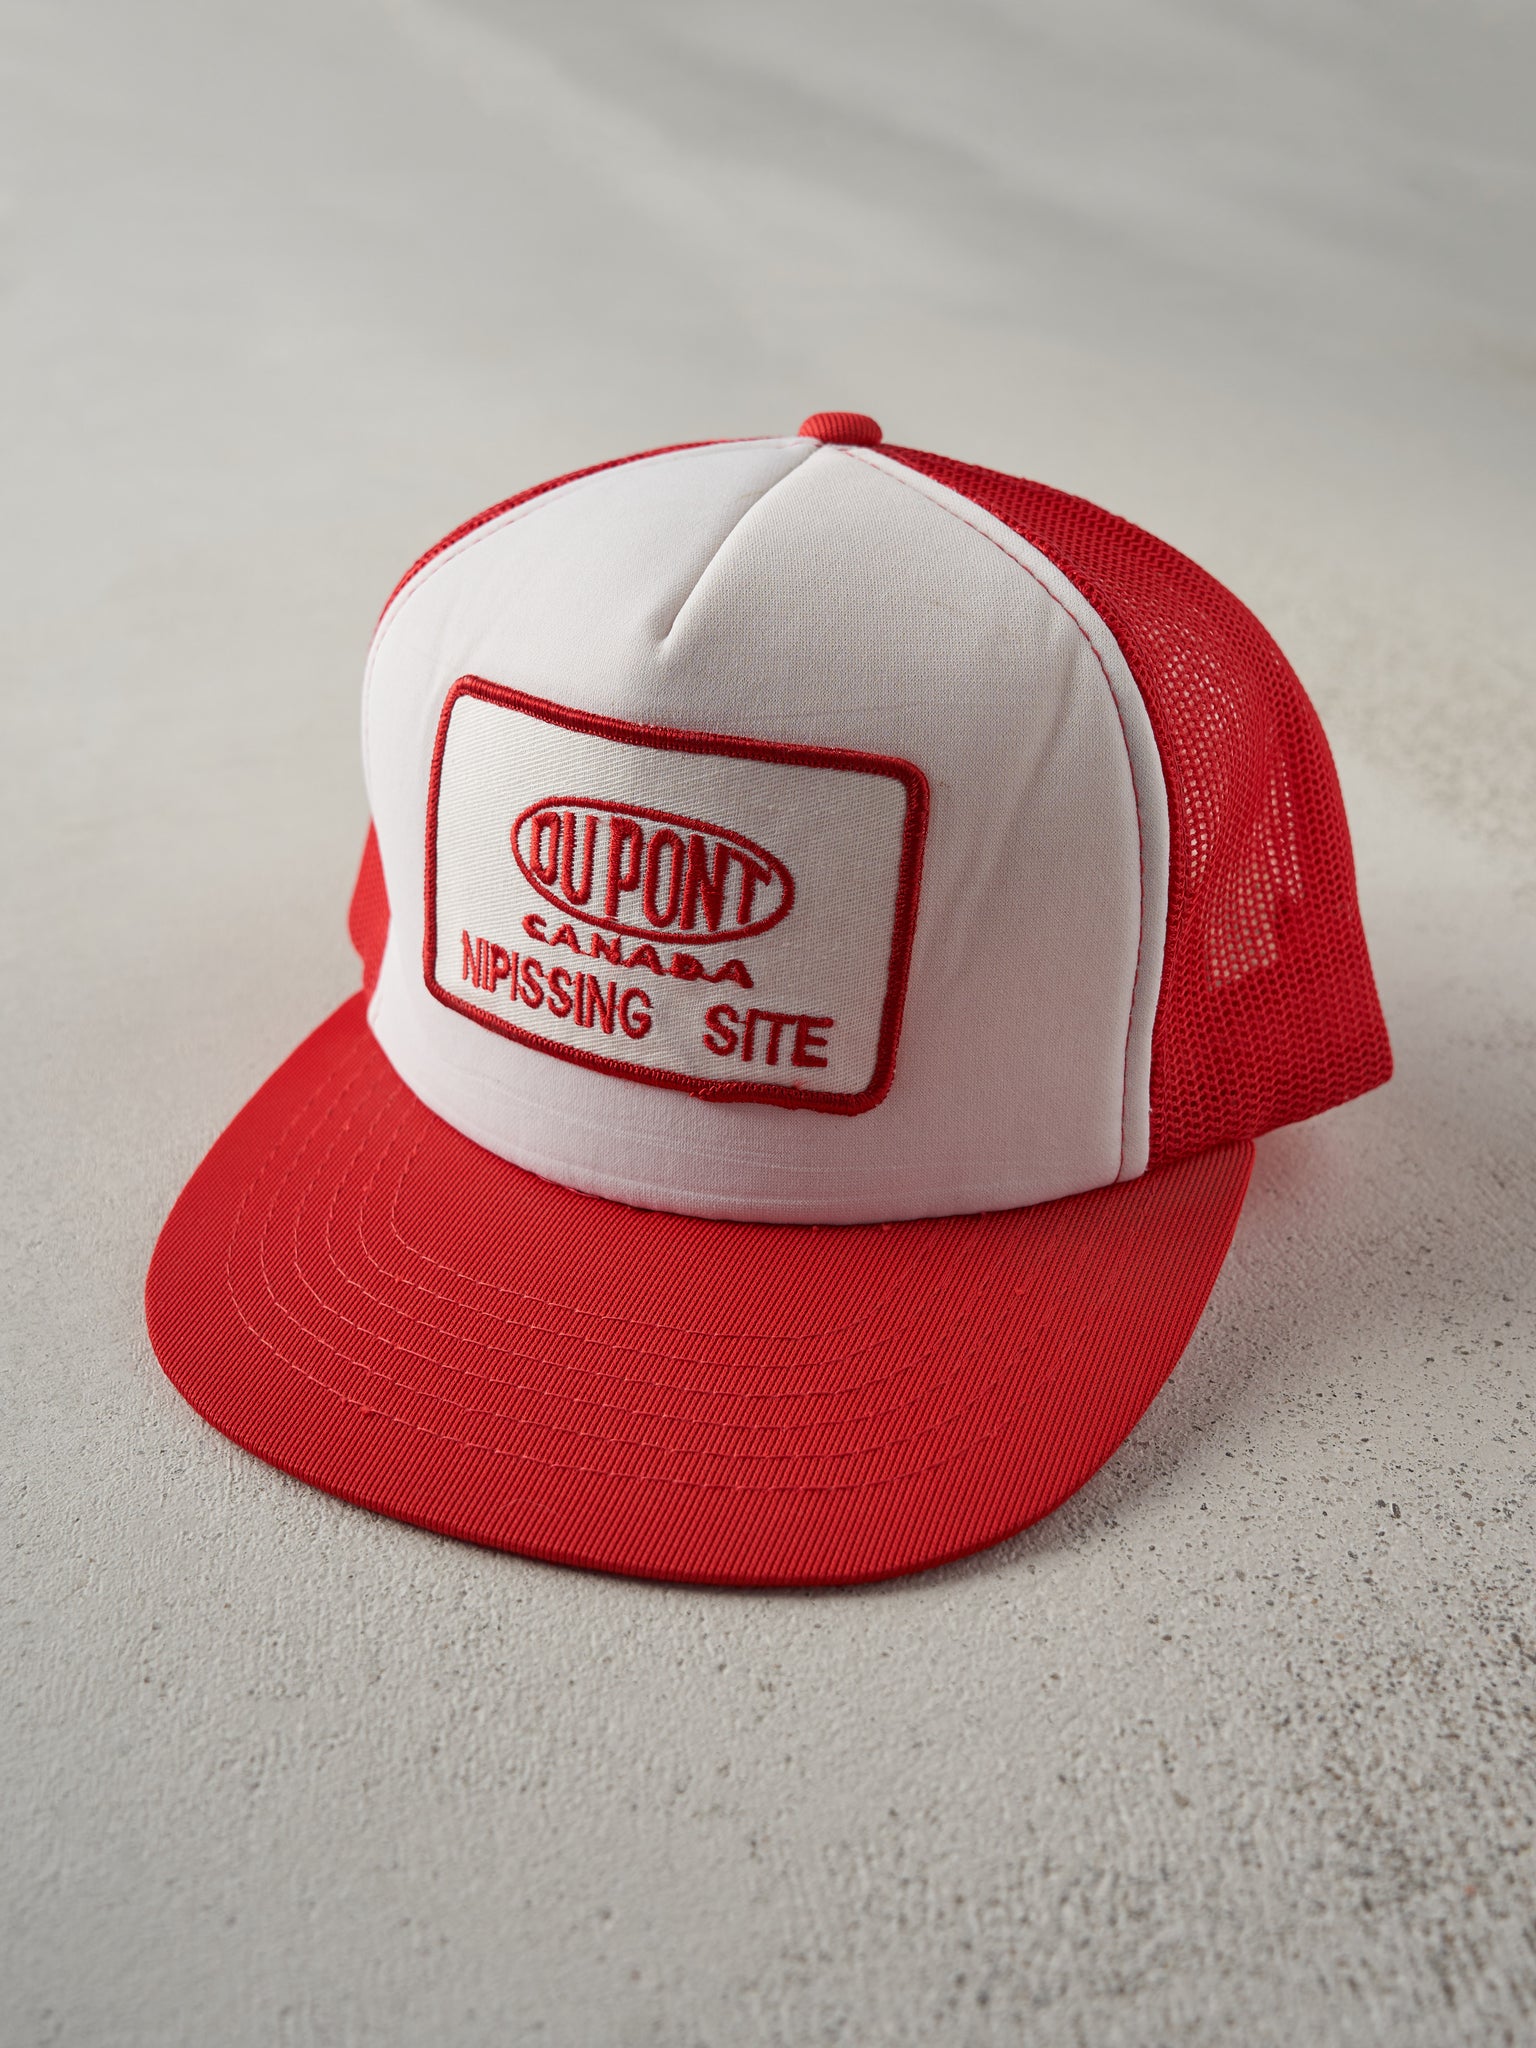 Vintage 80s Red and White Du Pont Canada Foam Trucker Hat